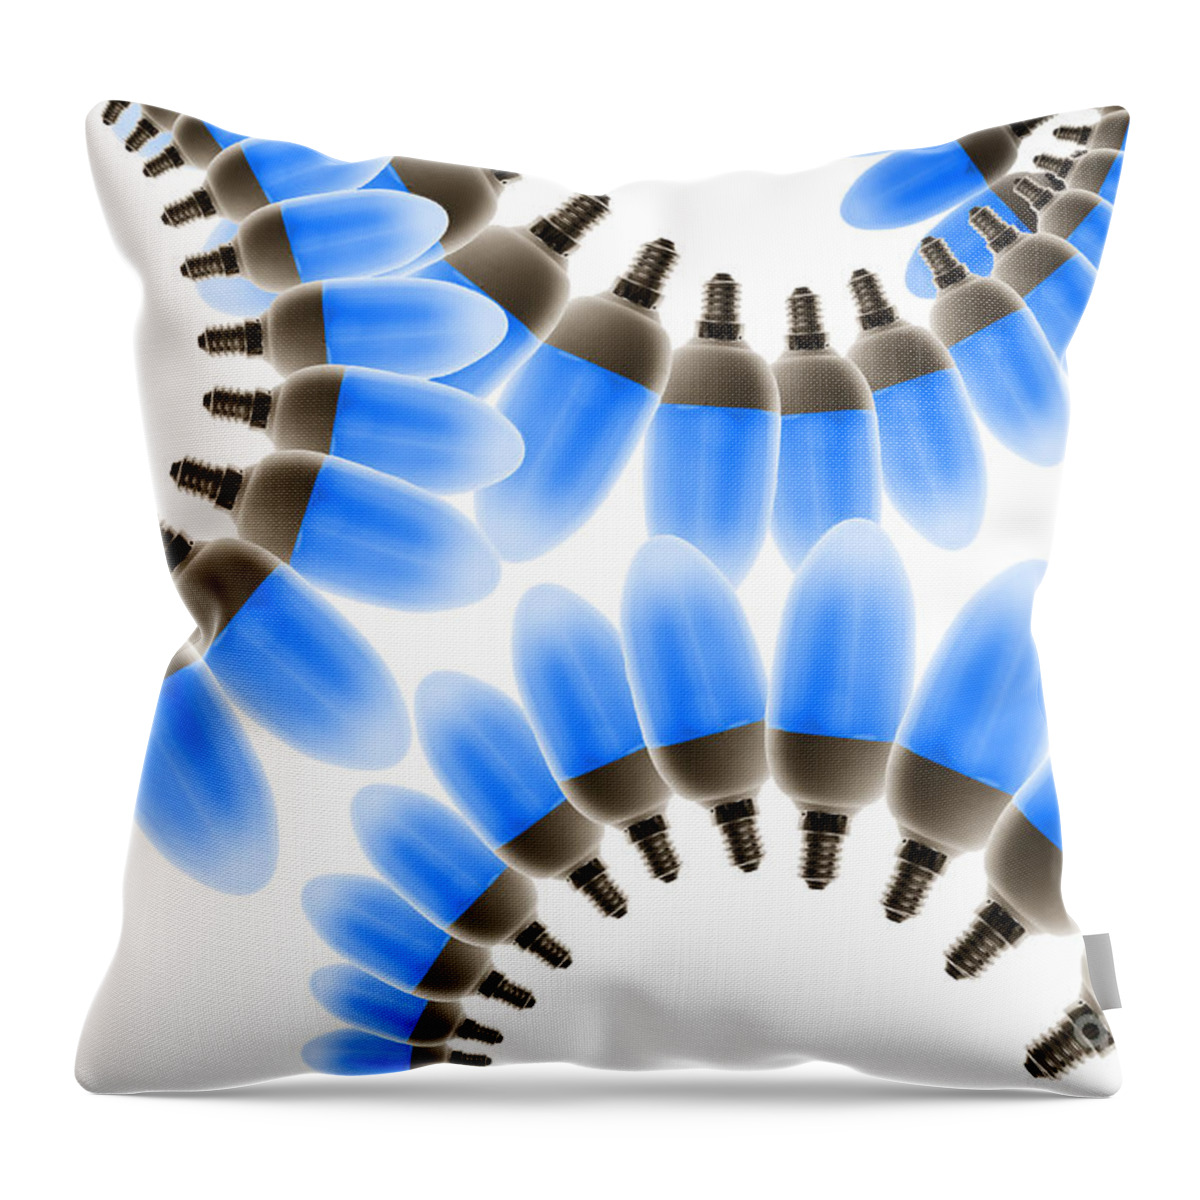 Abstract Throw Pillow featuring the photograph Light Bulbs, Artwork by Sigrid Gombert